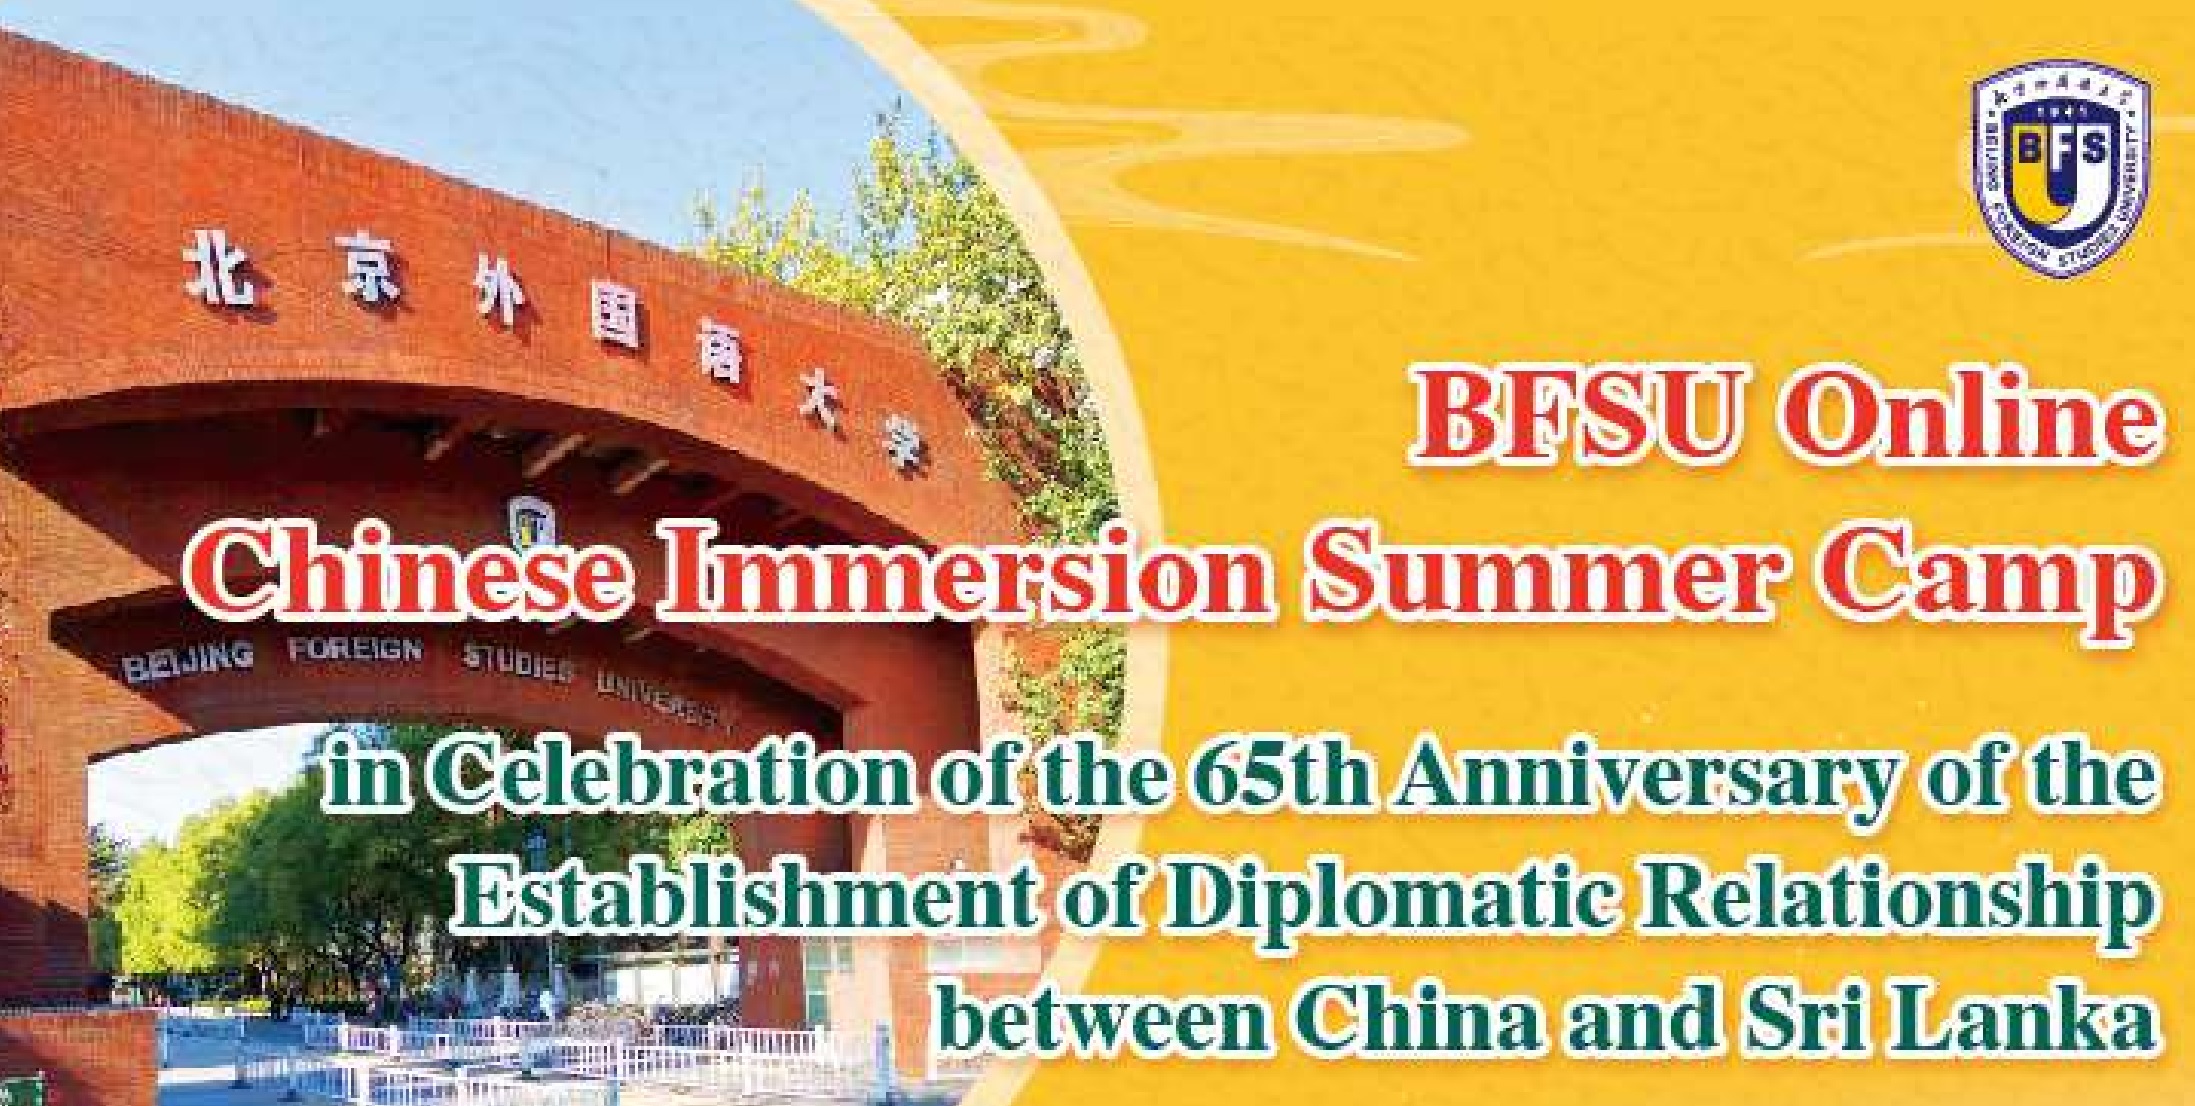 Call for Application for BFSU Online Chinese Immersion Summer Camp – 2022